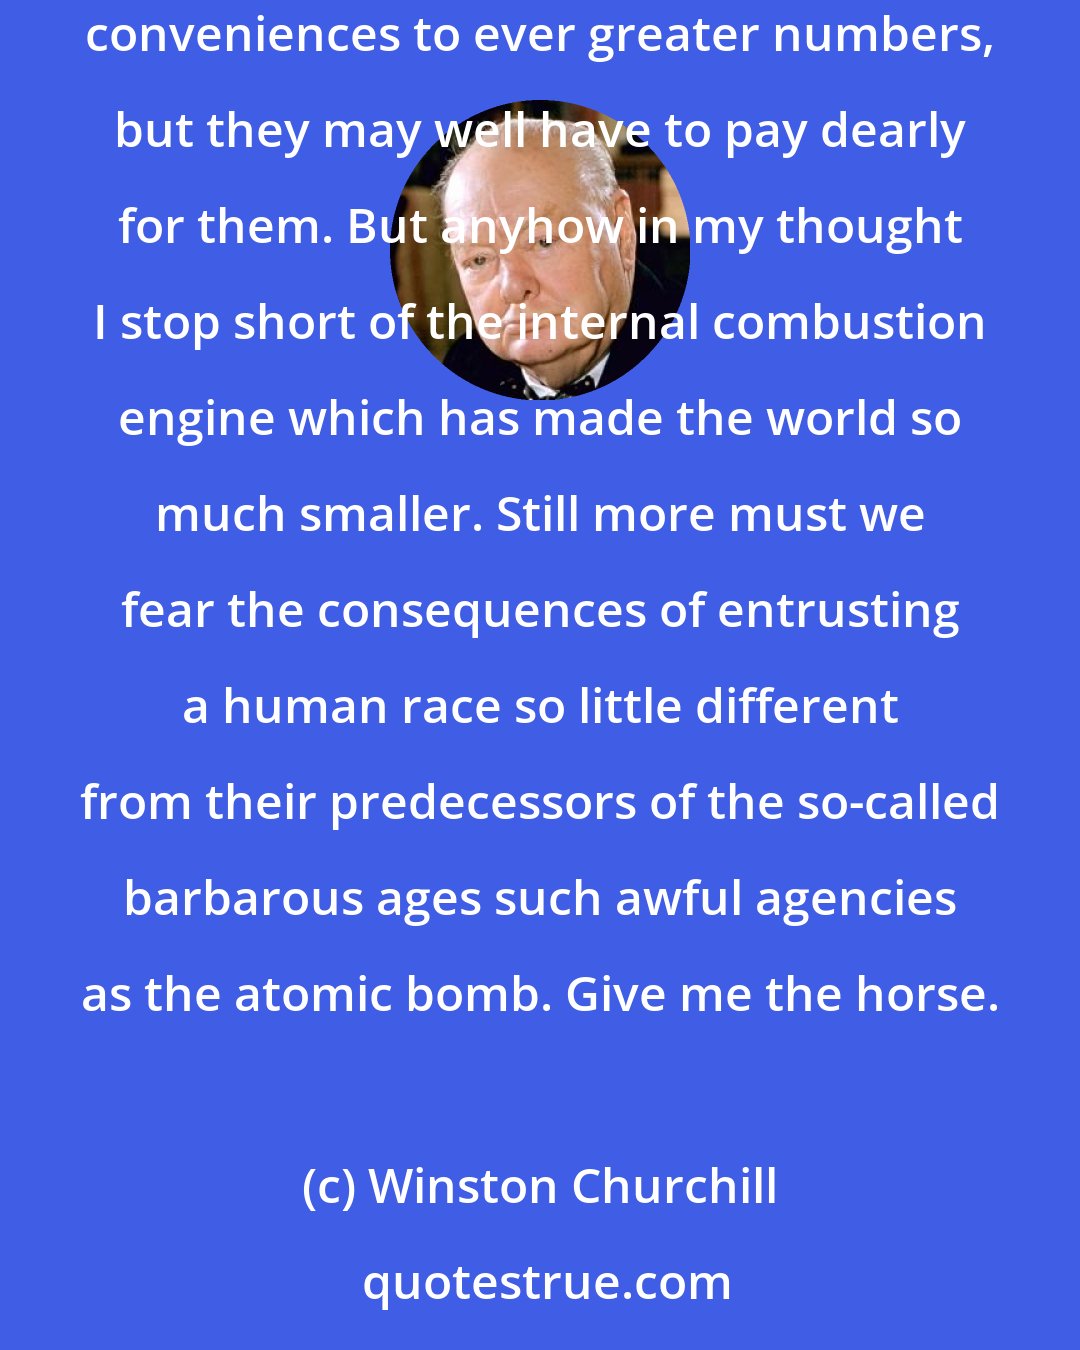 Winston Churchill: It is arguable whether the human race have been gainers by the march of science beyond the steam engine. Electricity opens a field of infinite conveniences to ever greater numbers, but they may well have to pay dearly for them. But anyhow in my thought I stop short of the internal combustion engine which has made the world so much smaller. Still more must we fear the consequences of entrusting a human race so little different from their predecessors of the so-called barbarous ages such awful agencies as the atomic bomb. Give me the horse.